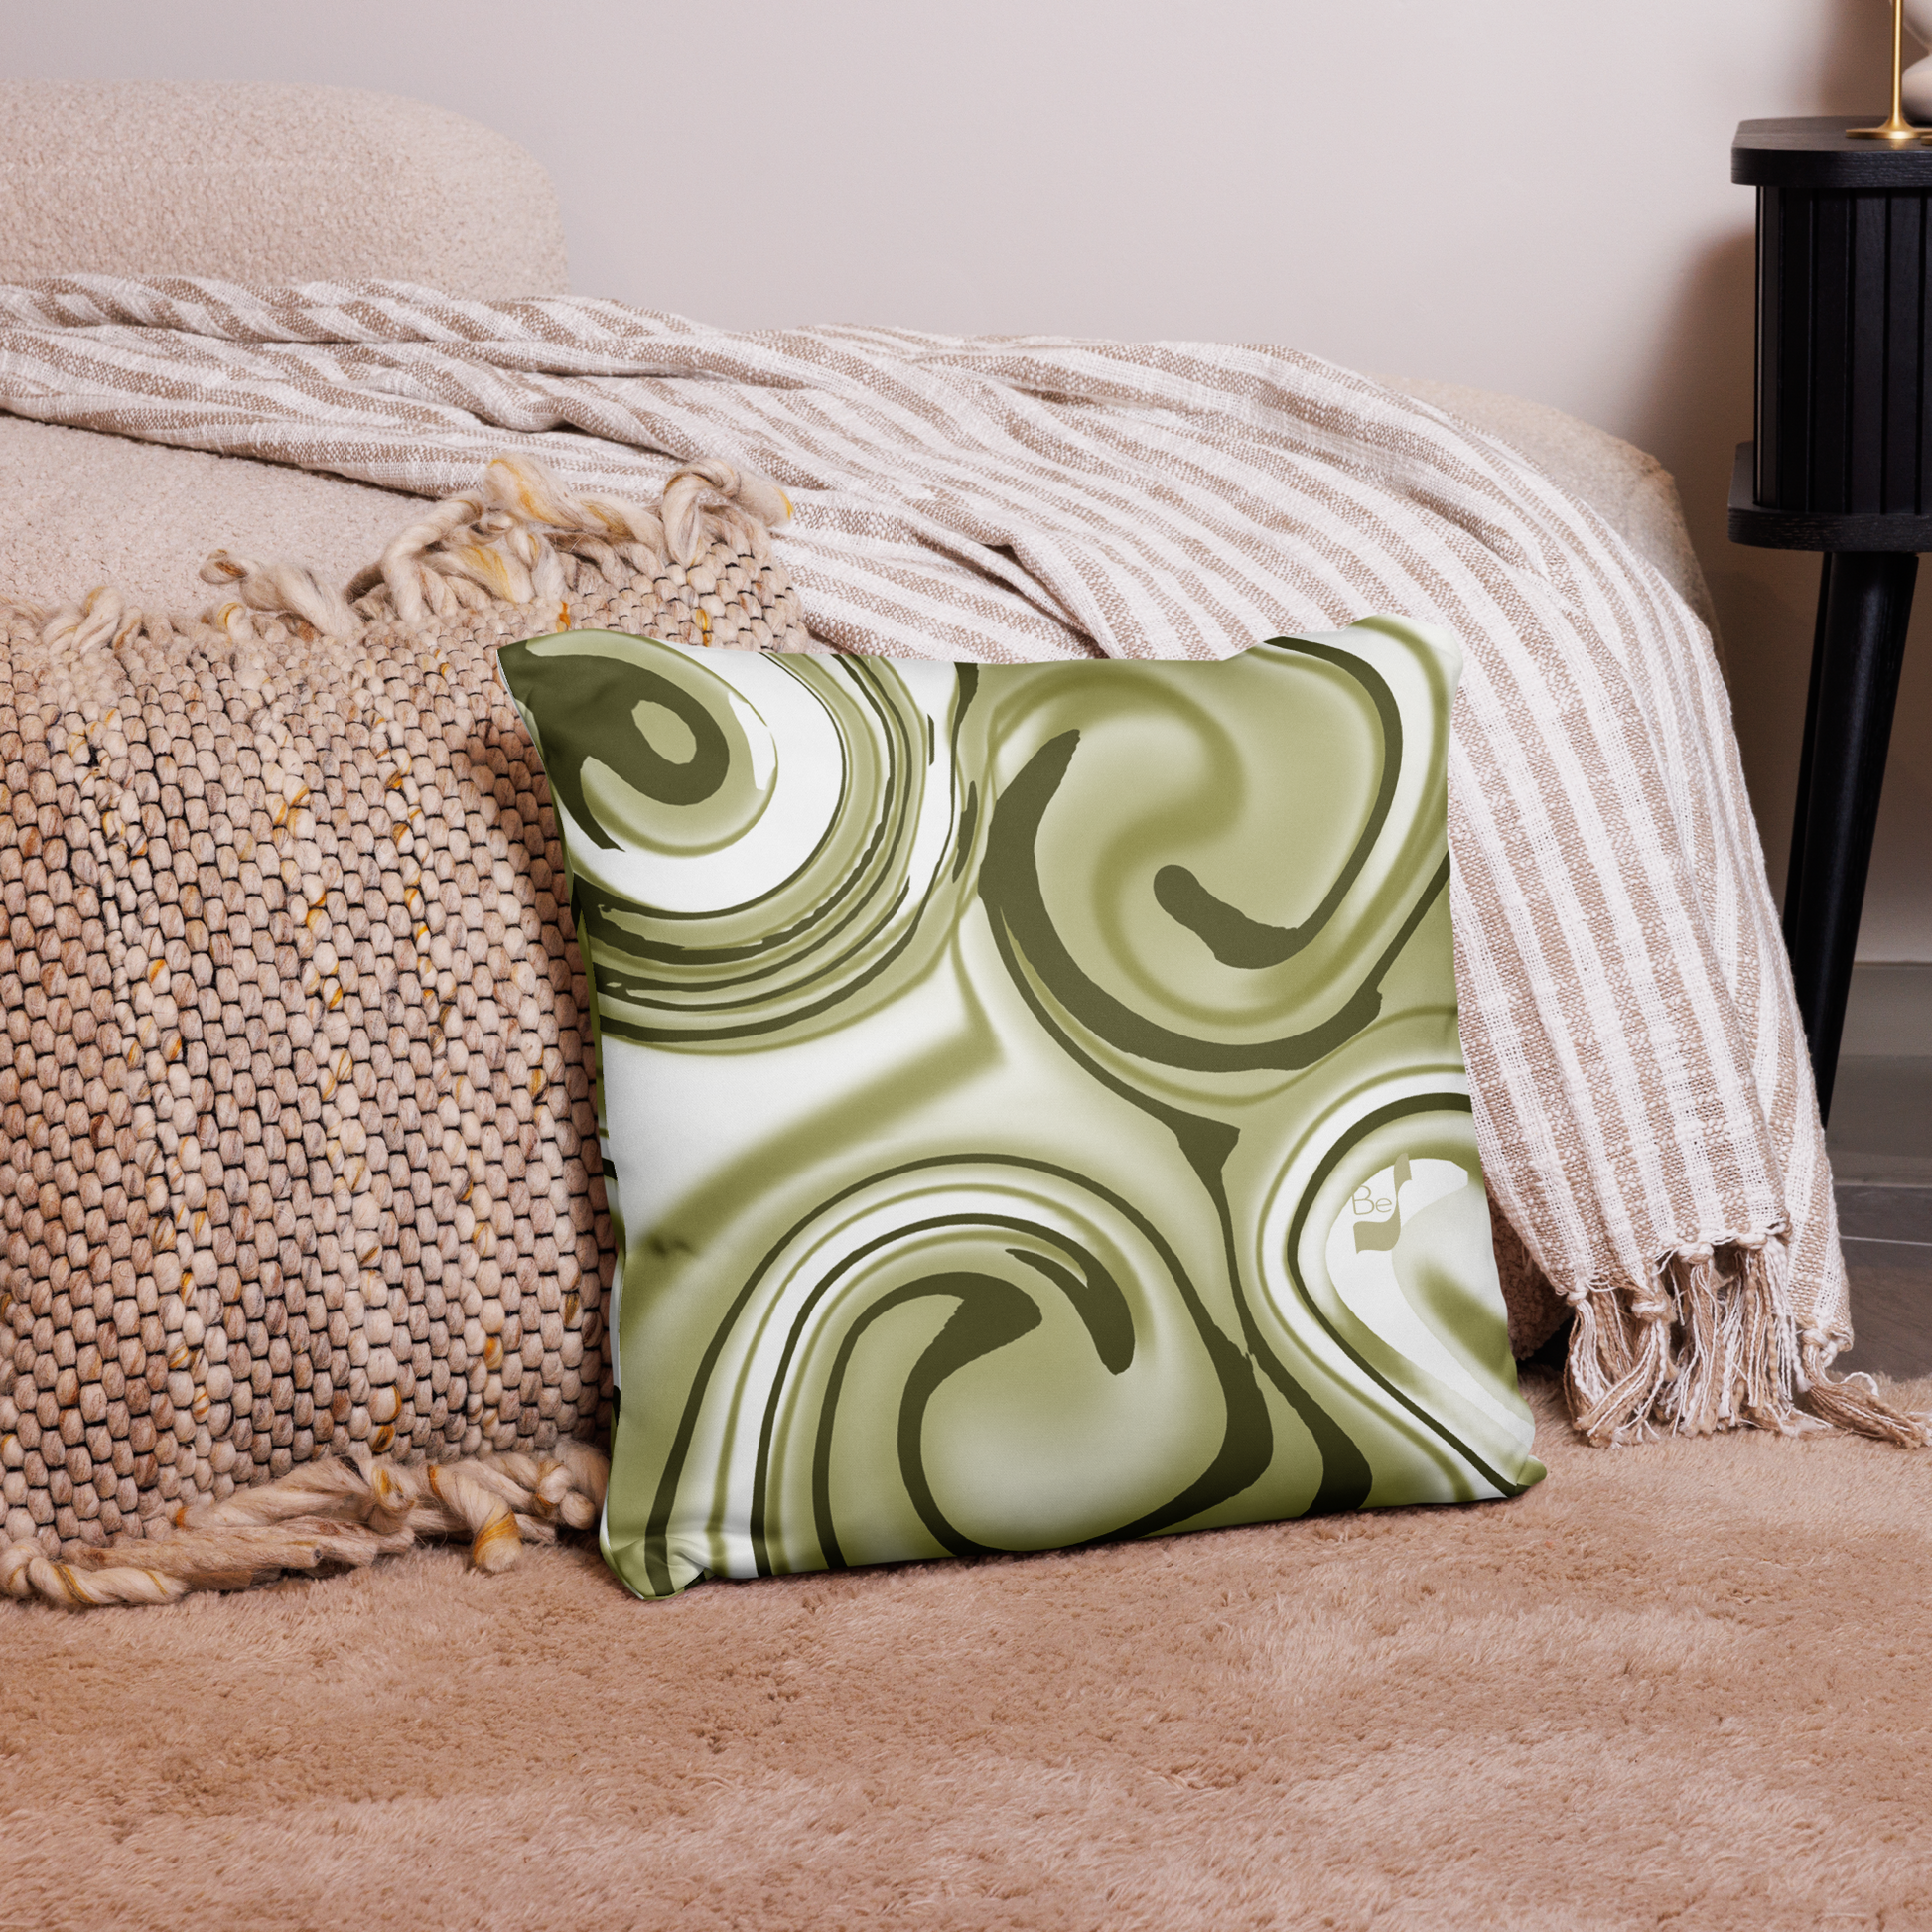 Step into a world of captivating nostalgia with the Retro BeSculpt Abstract Art Throw Pillow. 